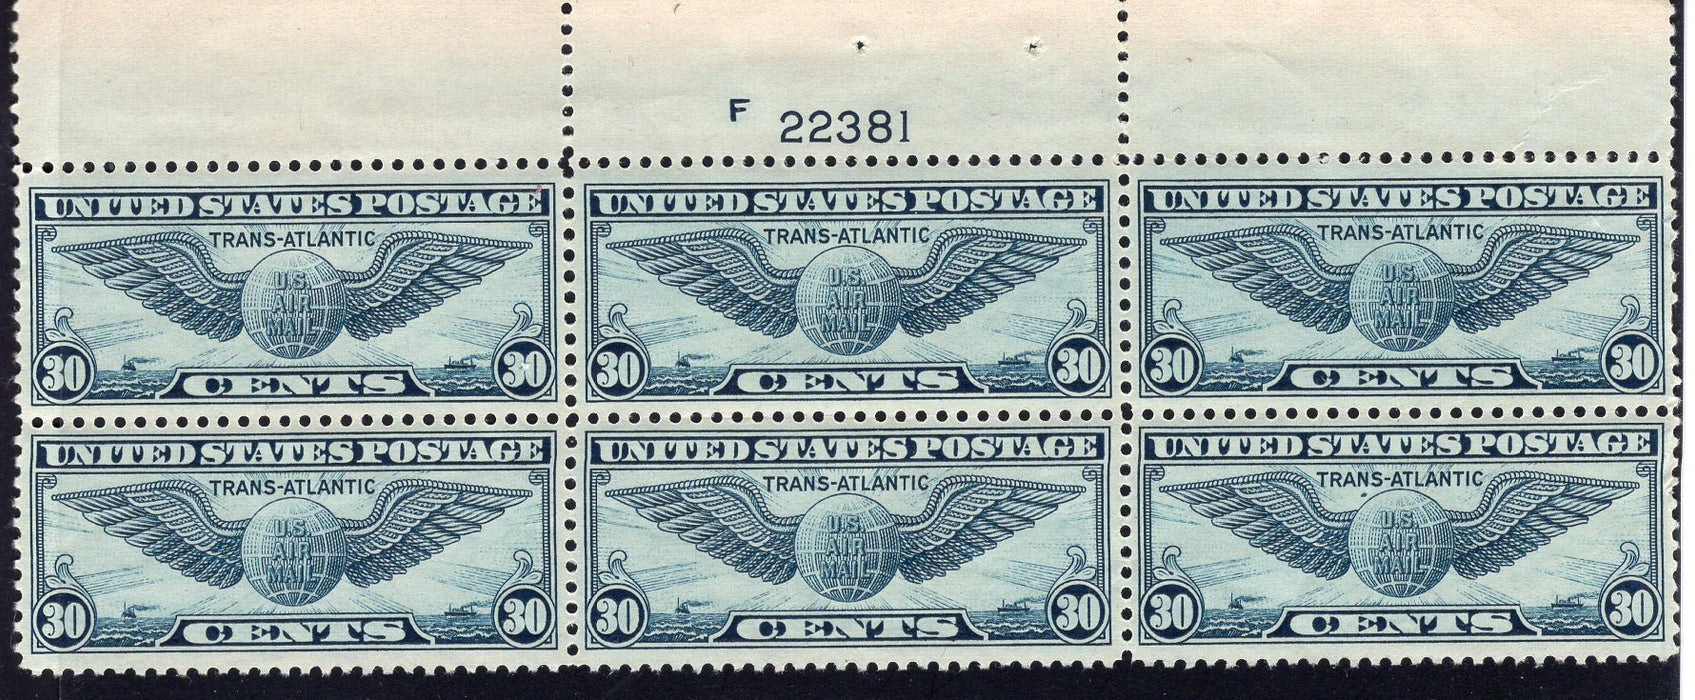 #C24 Mint 30 cent Winged Globe Plate Block PL#22381. Choice plate. XF NH US Stamp